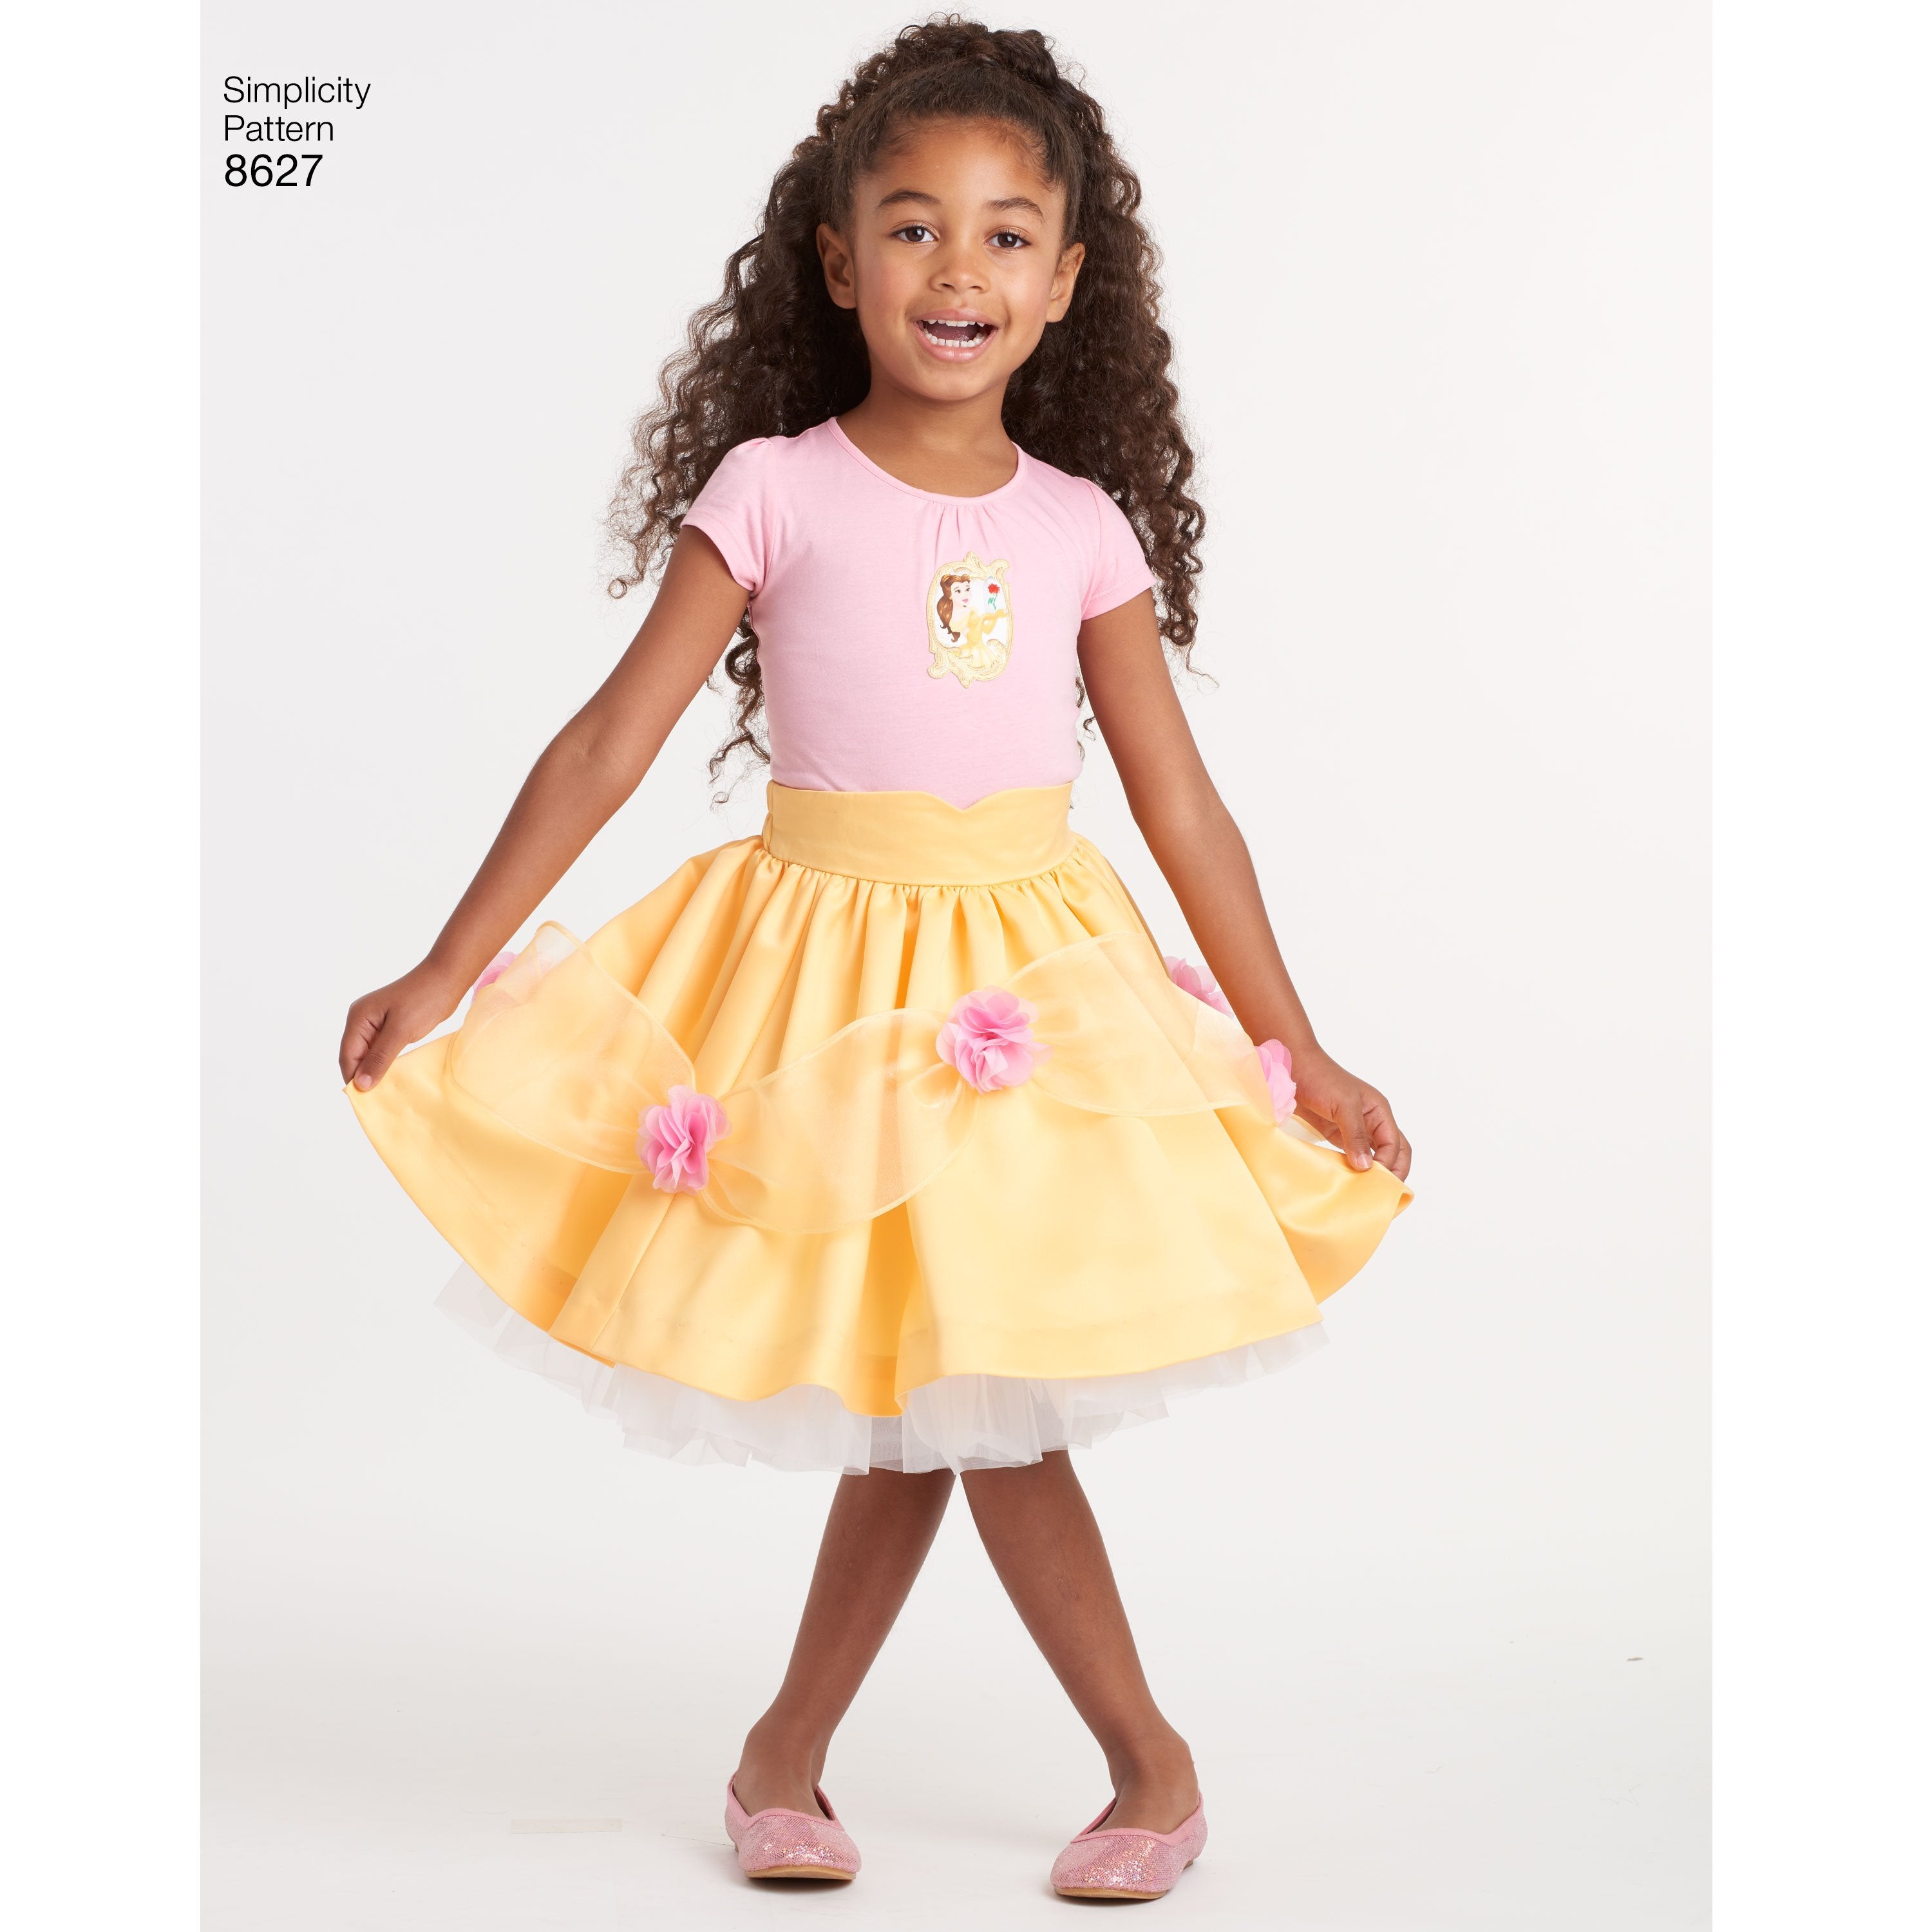 Simplicity Pattern 8627  Disney princess  skirts for children from Jaycotts Sewing Supplies